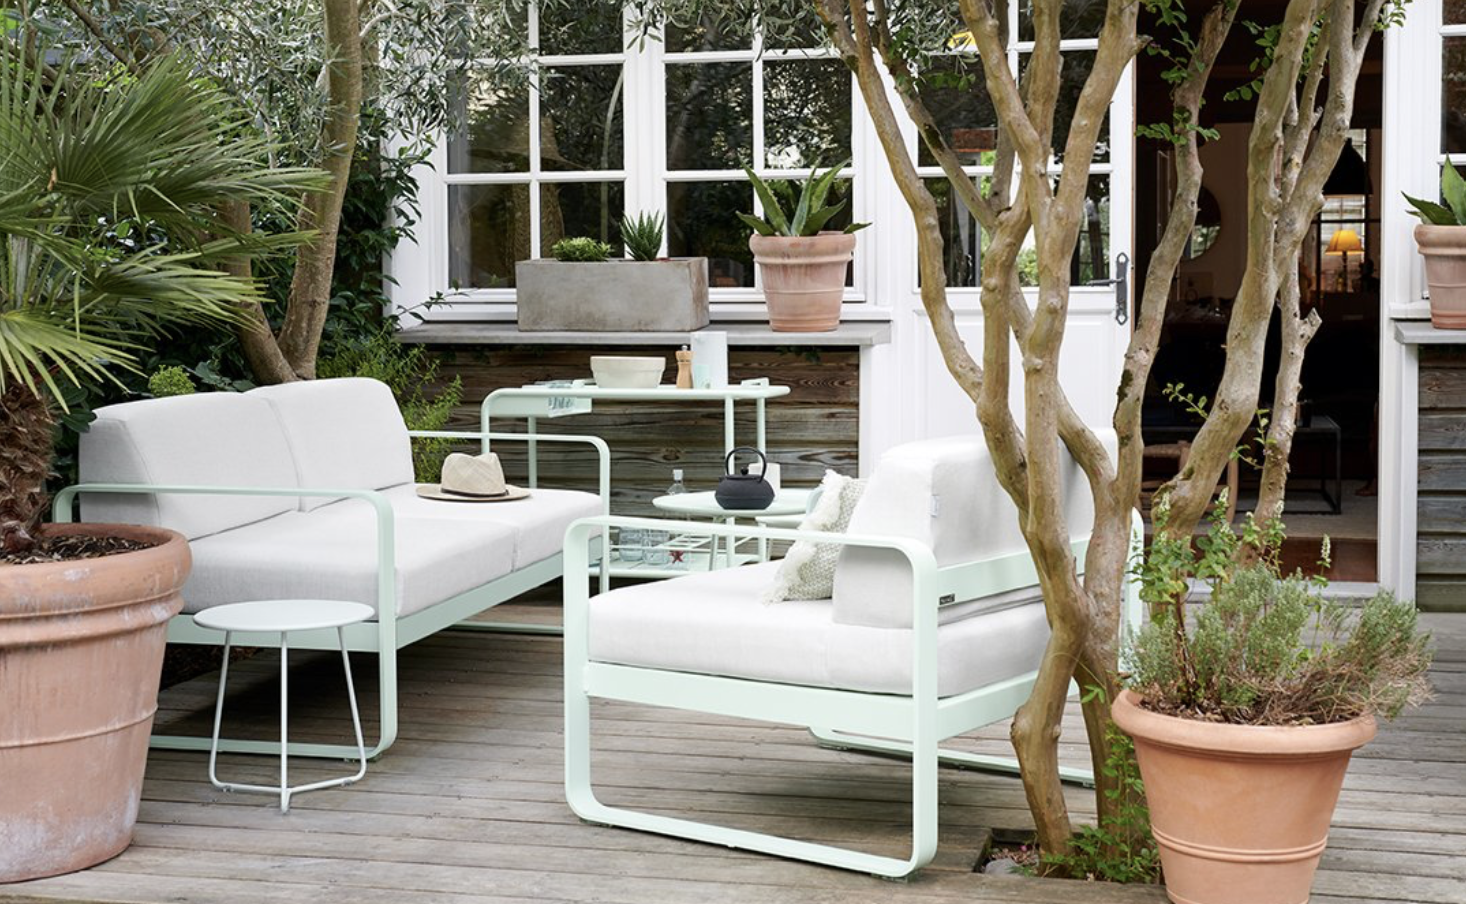 outside seating is a must for the garden